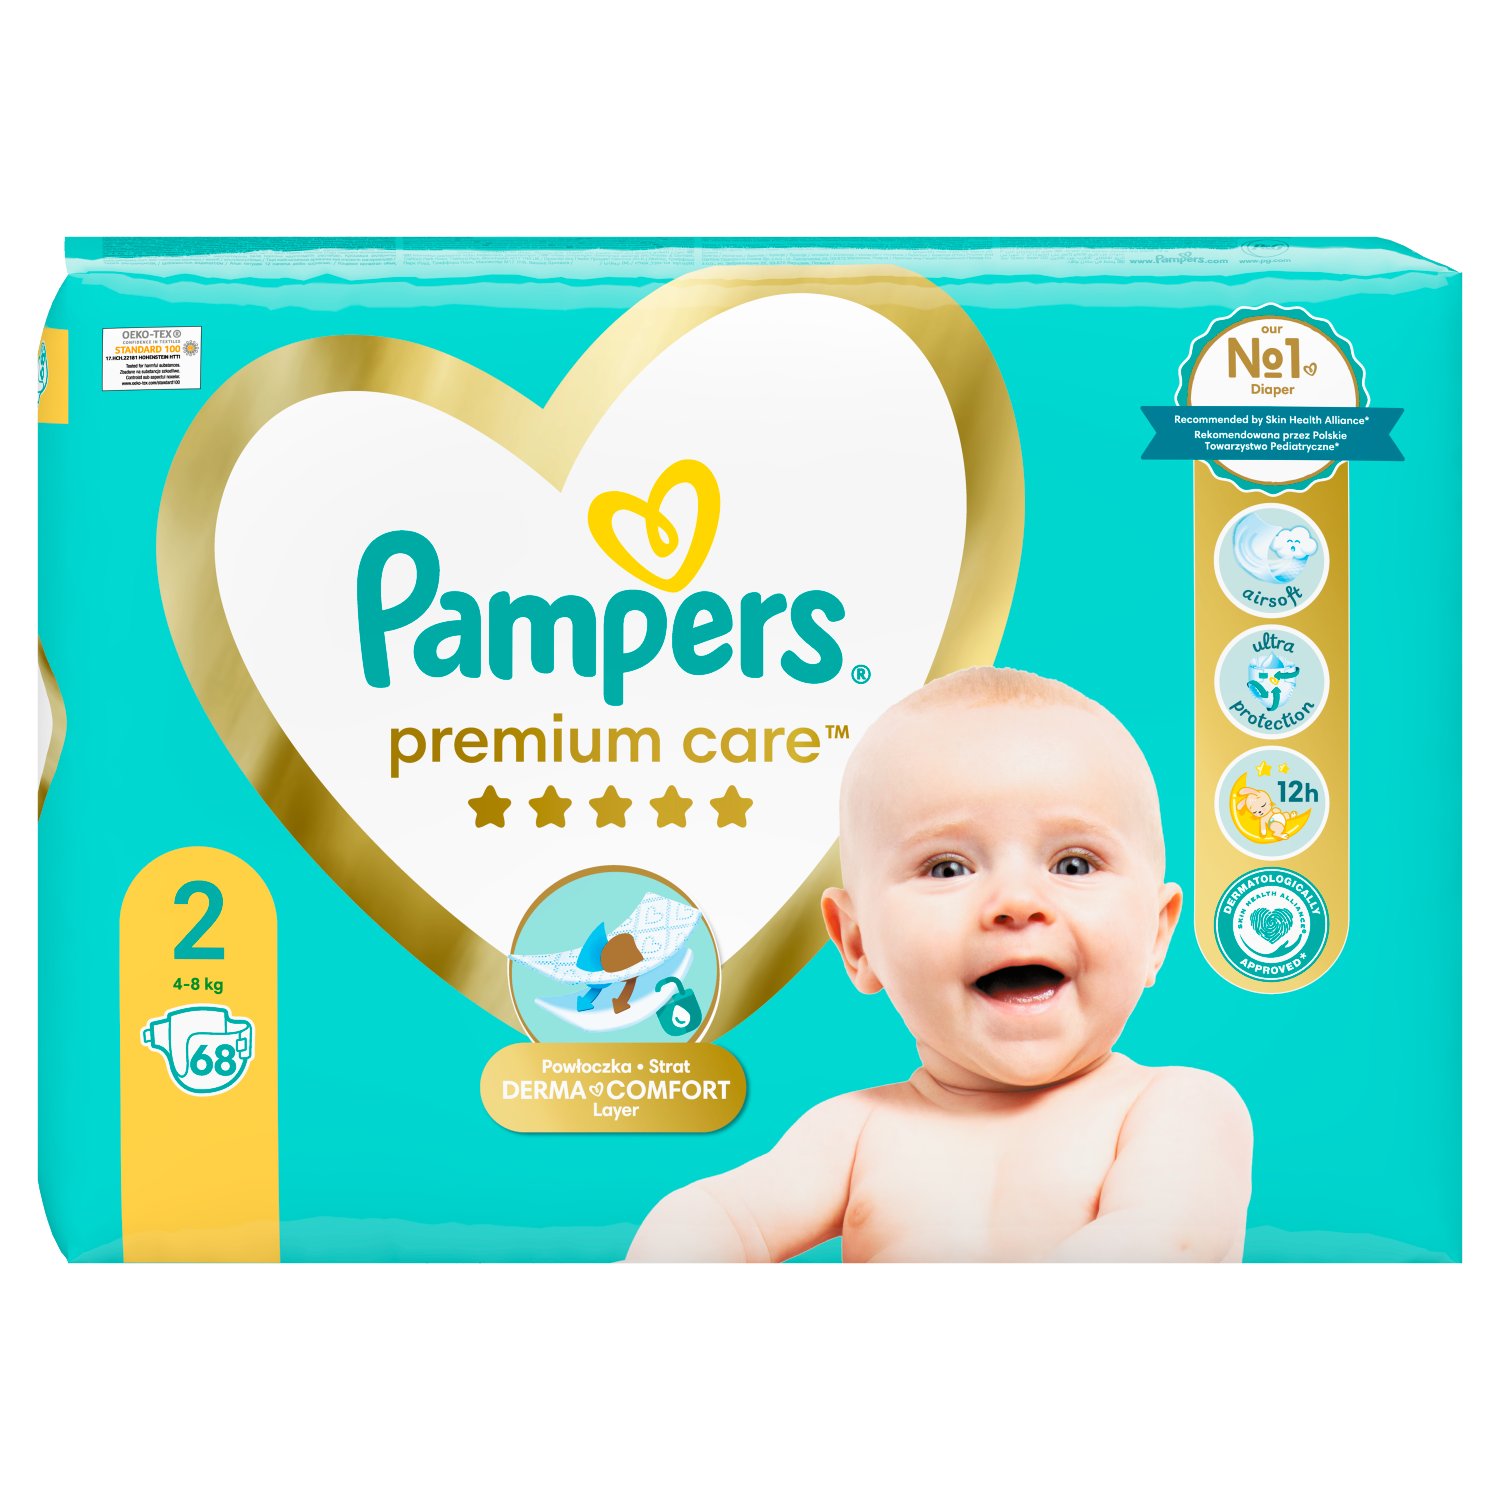 family servise.blok tematyczny pampers